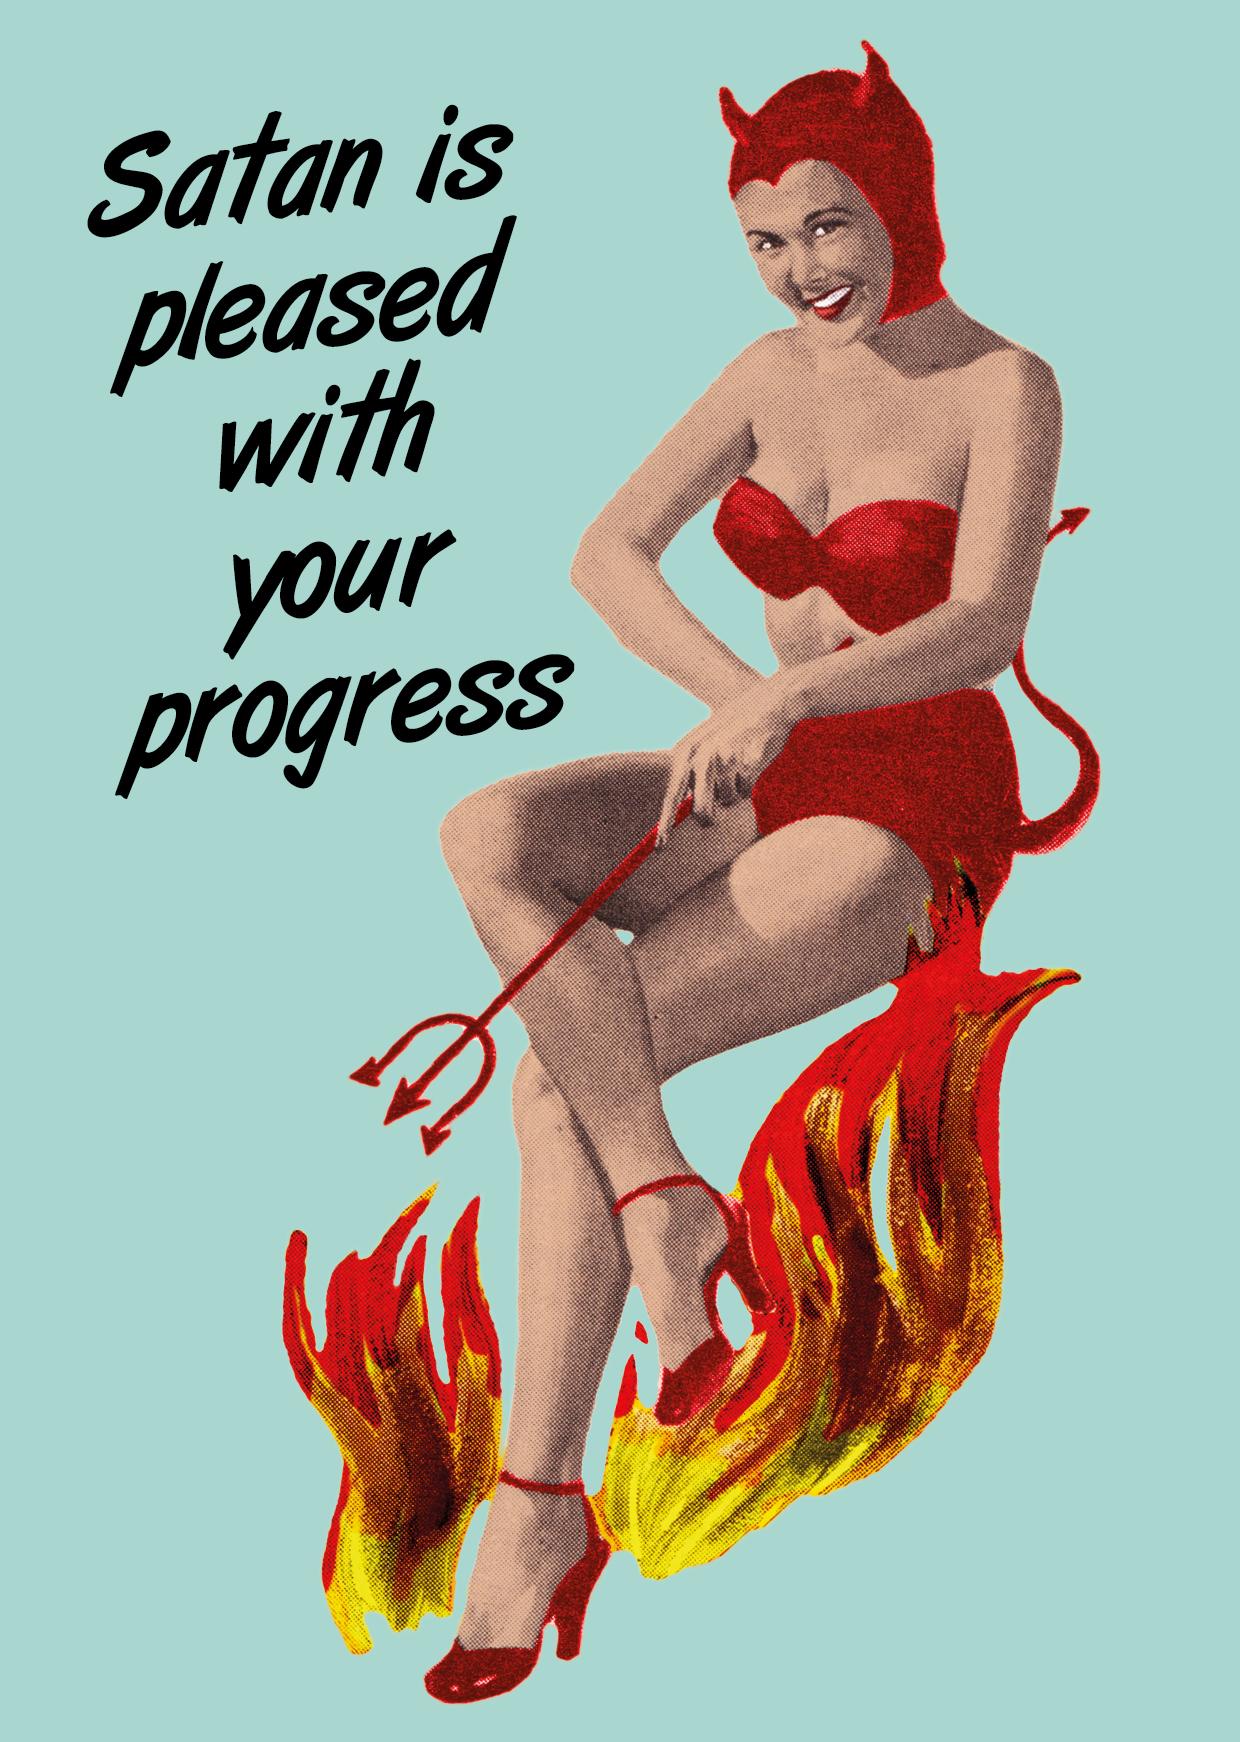 Satan is pleased with your progress